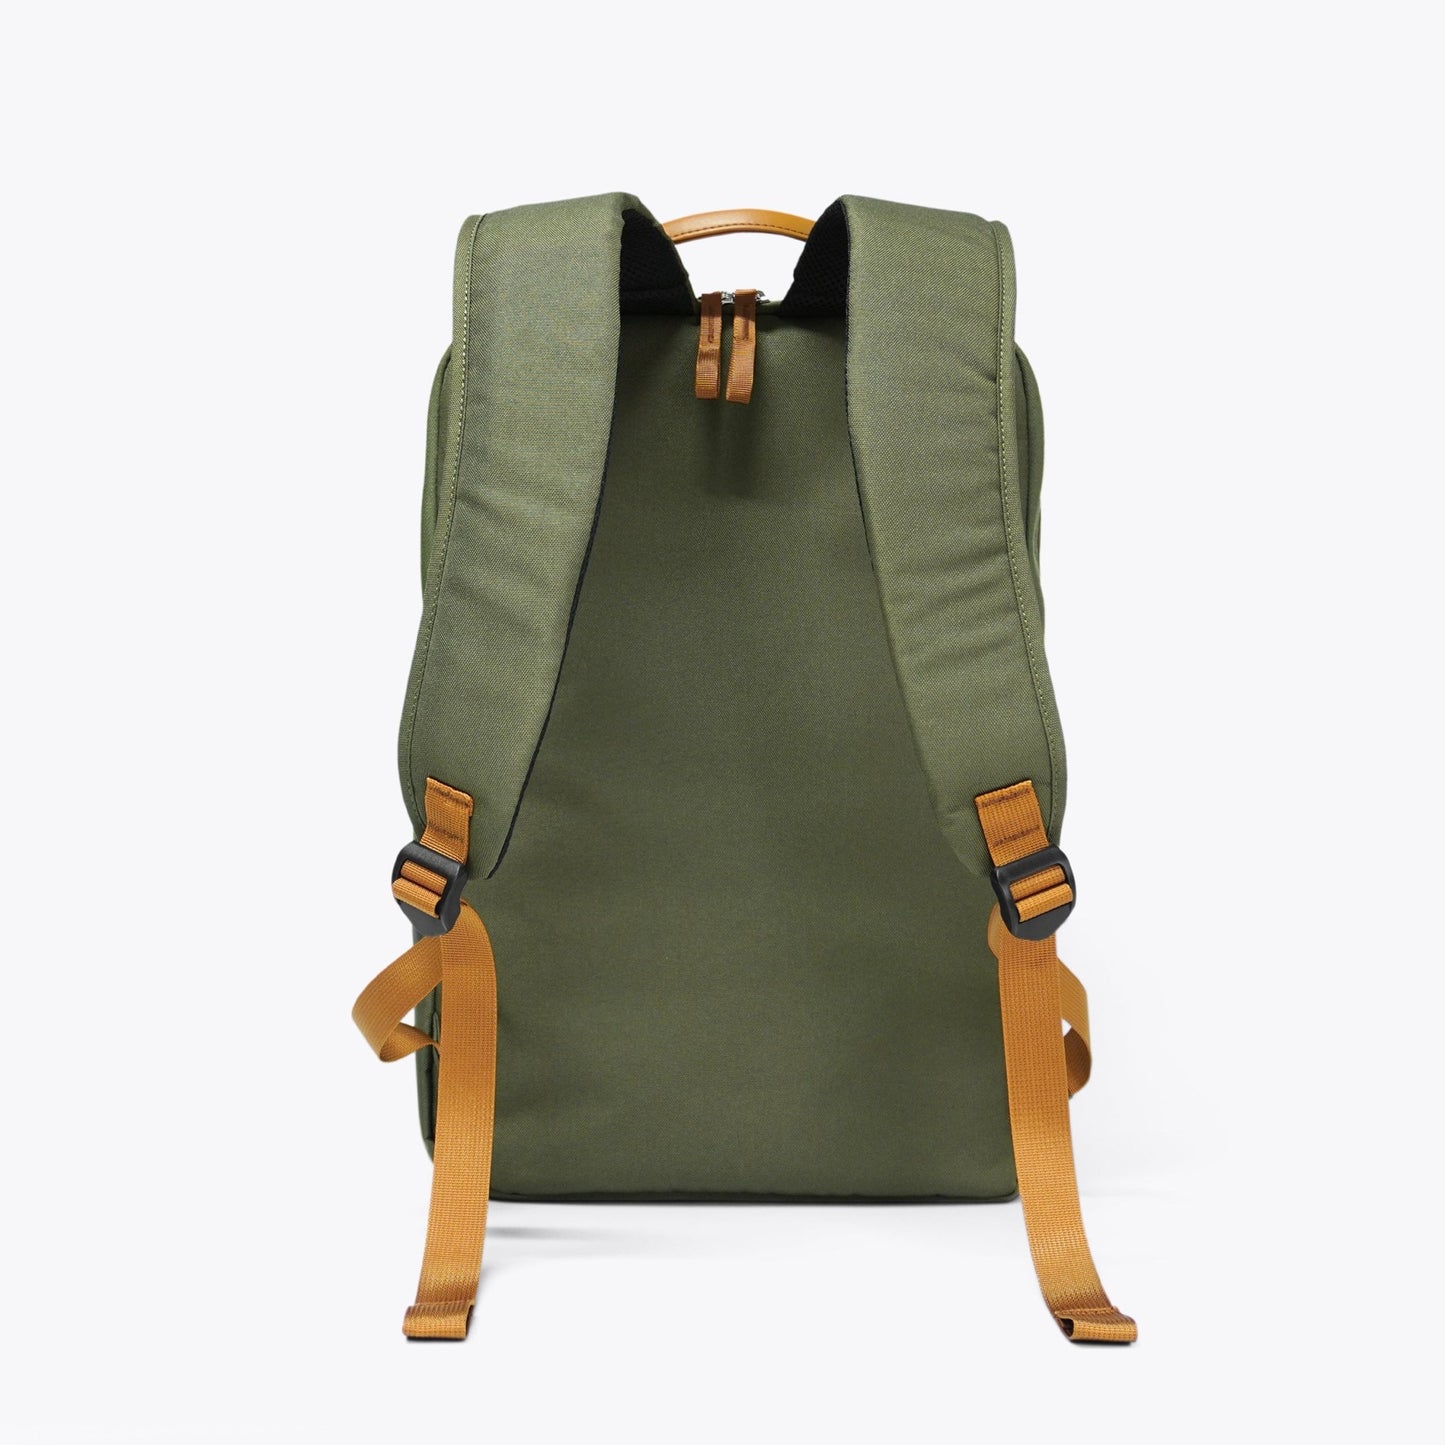 EARTH Backpack - Olive - www.countryhide.com